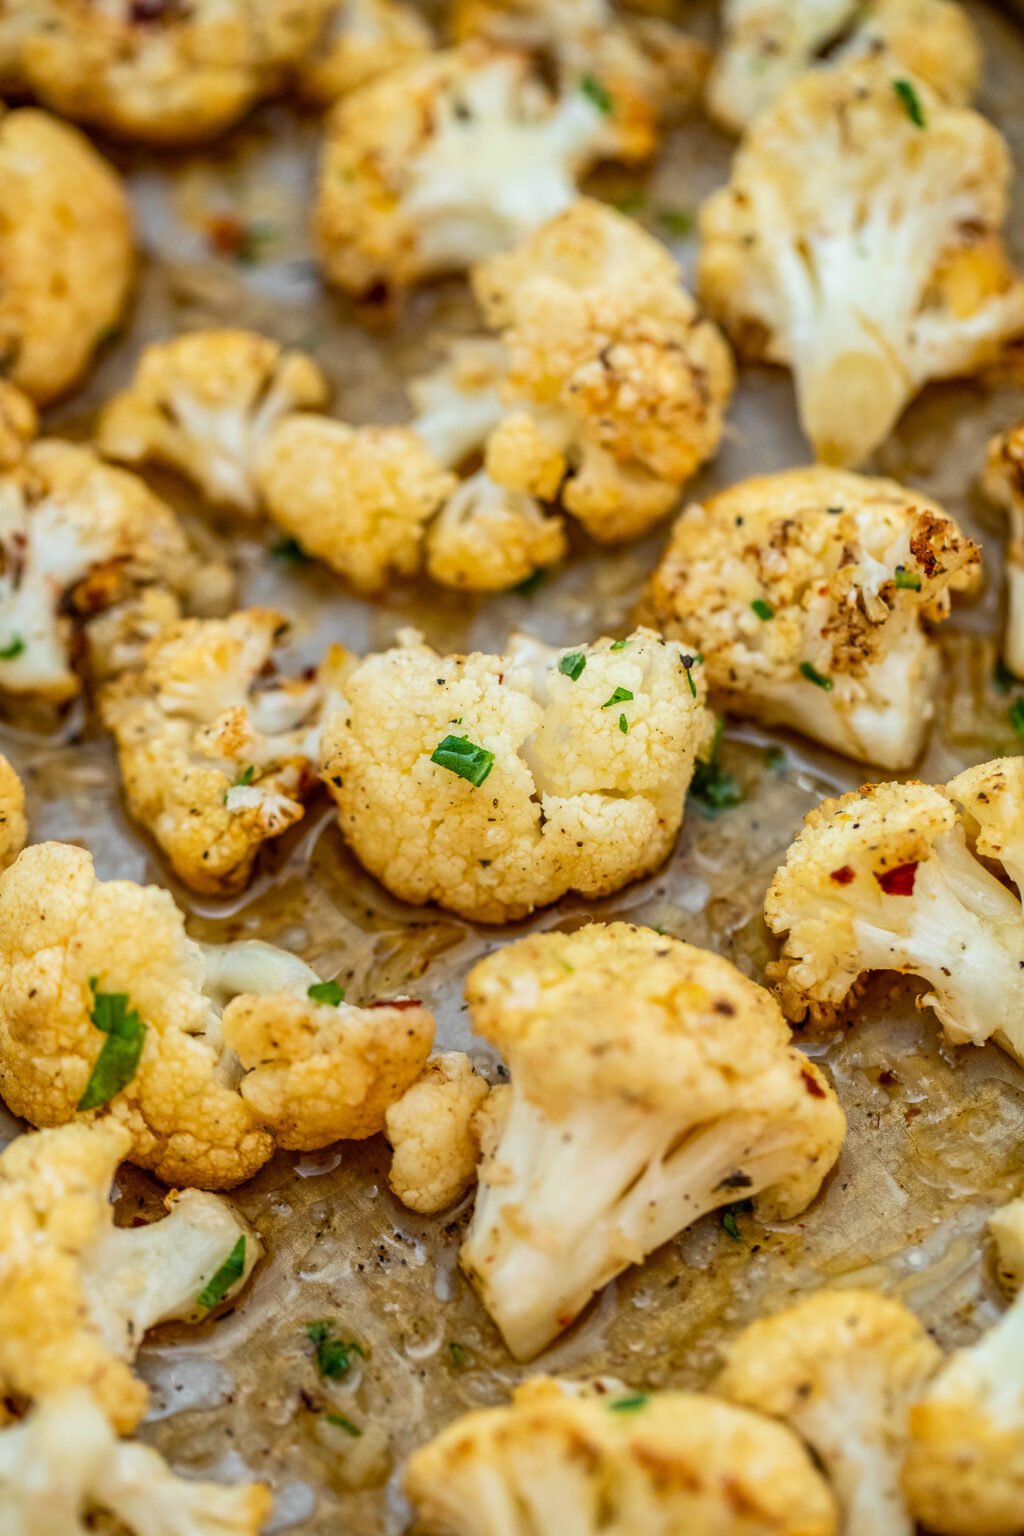 Oven Roasted Cauliflower Recipe [VIDEO] - Sweet and Savory Meals